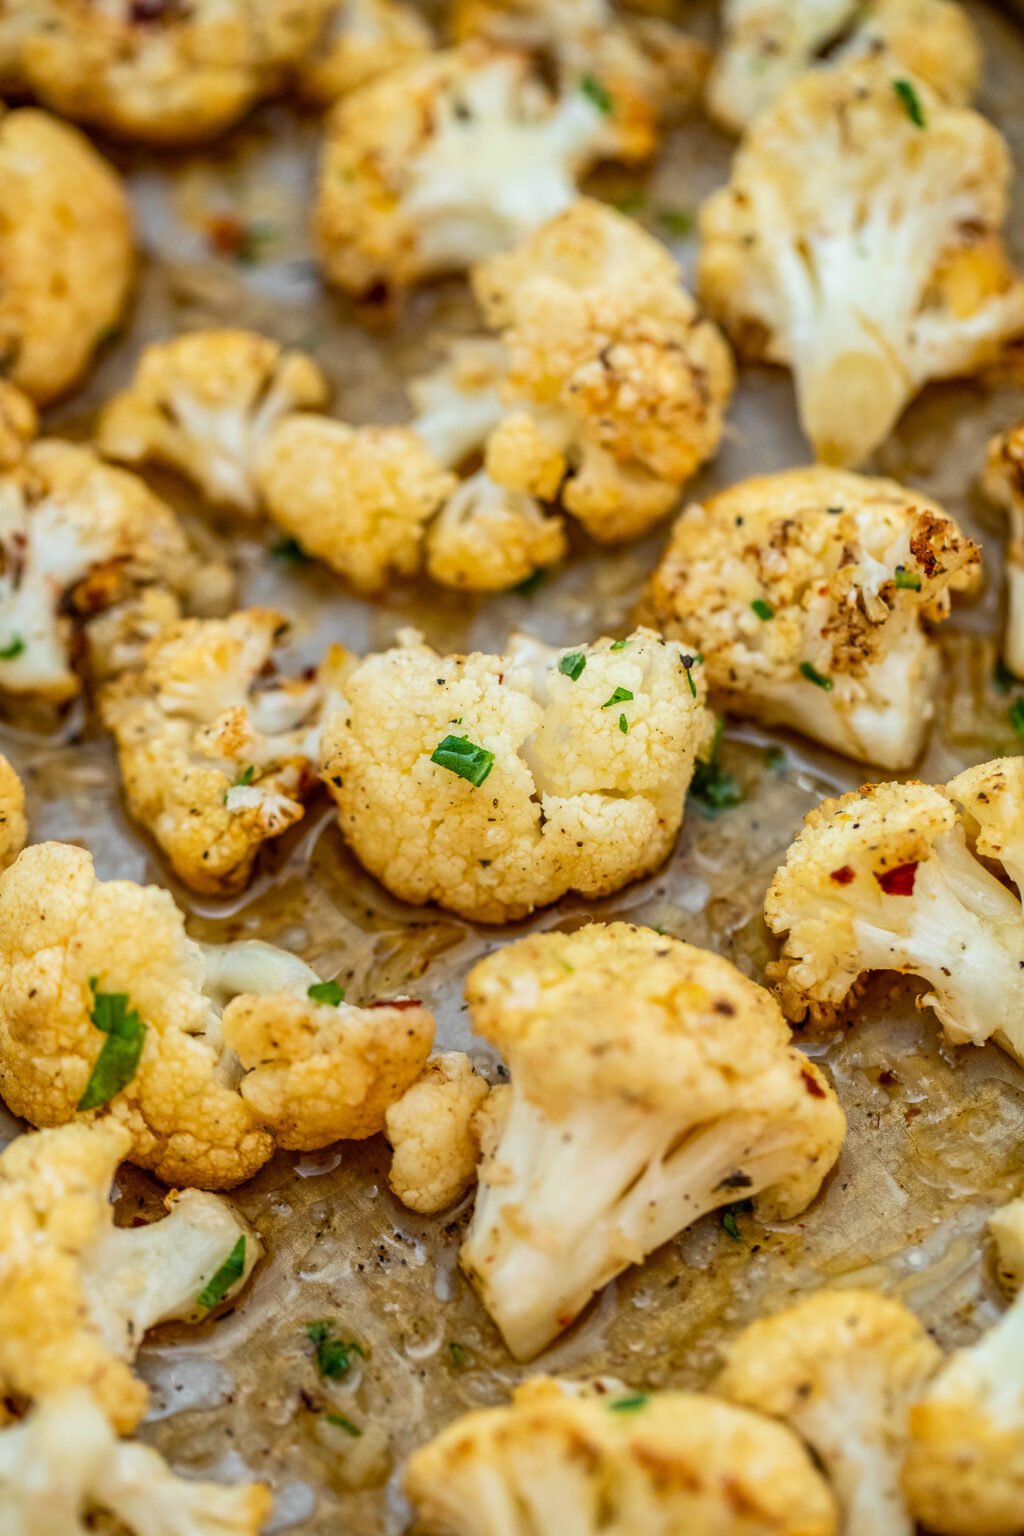 Oven Roasted Cauliflower Recipe [VIDEO] - Sweet and Savory Meals